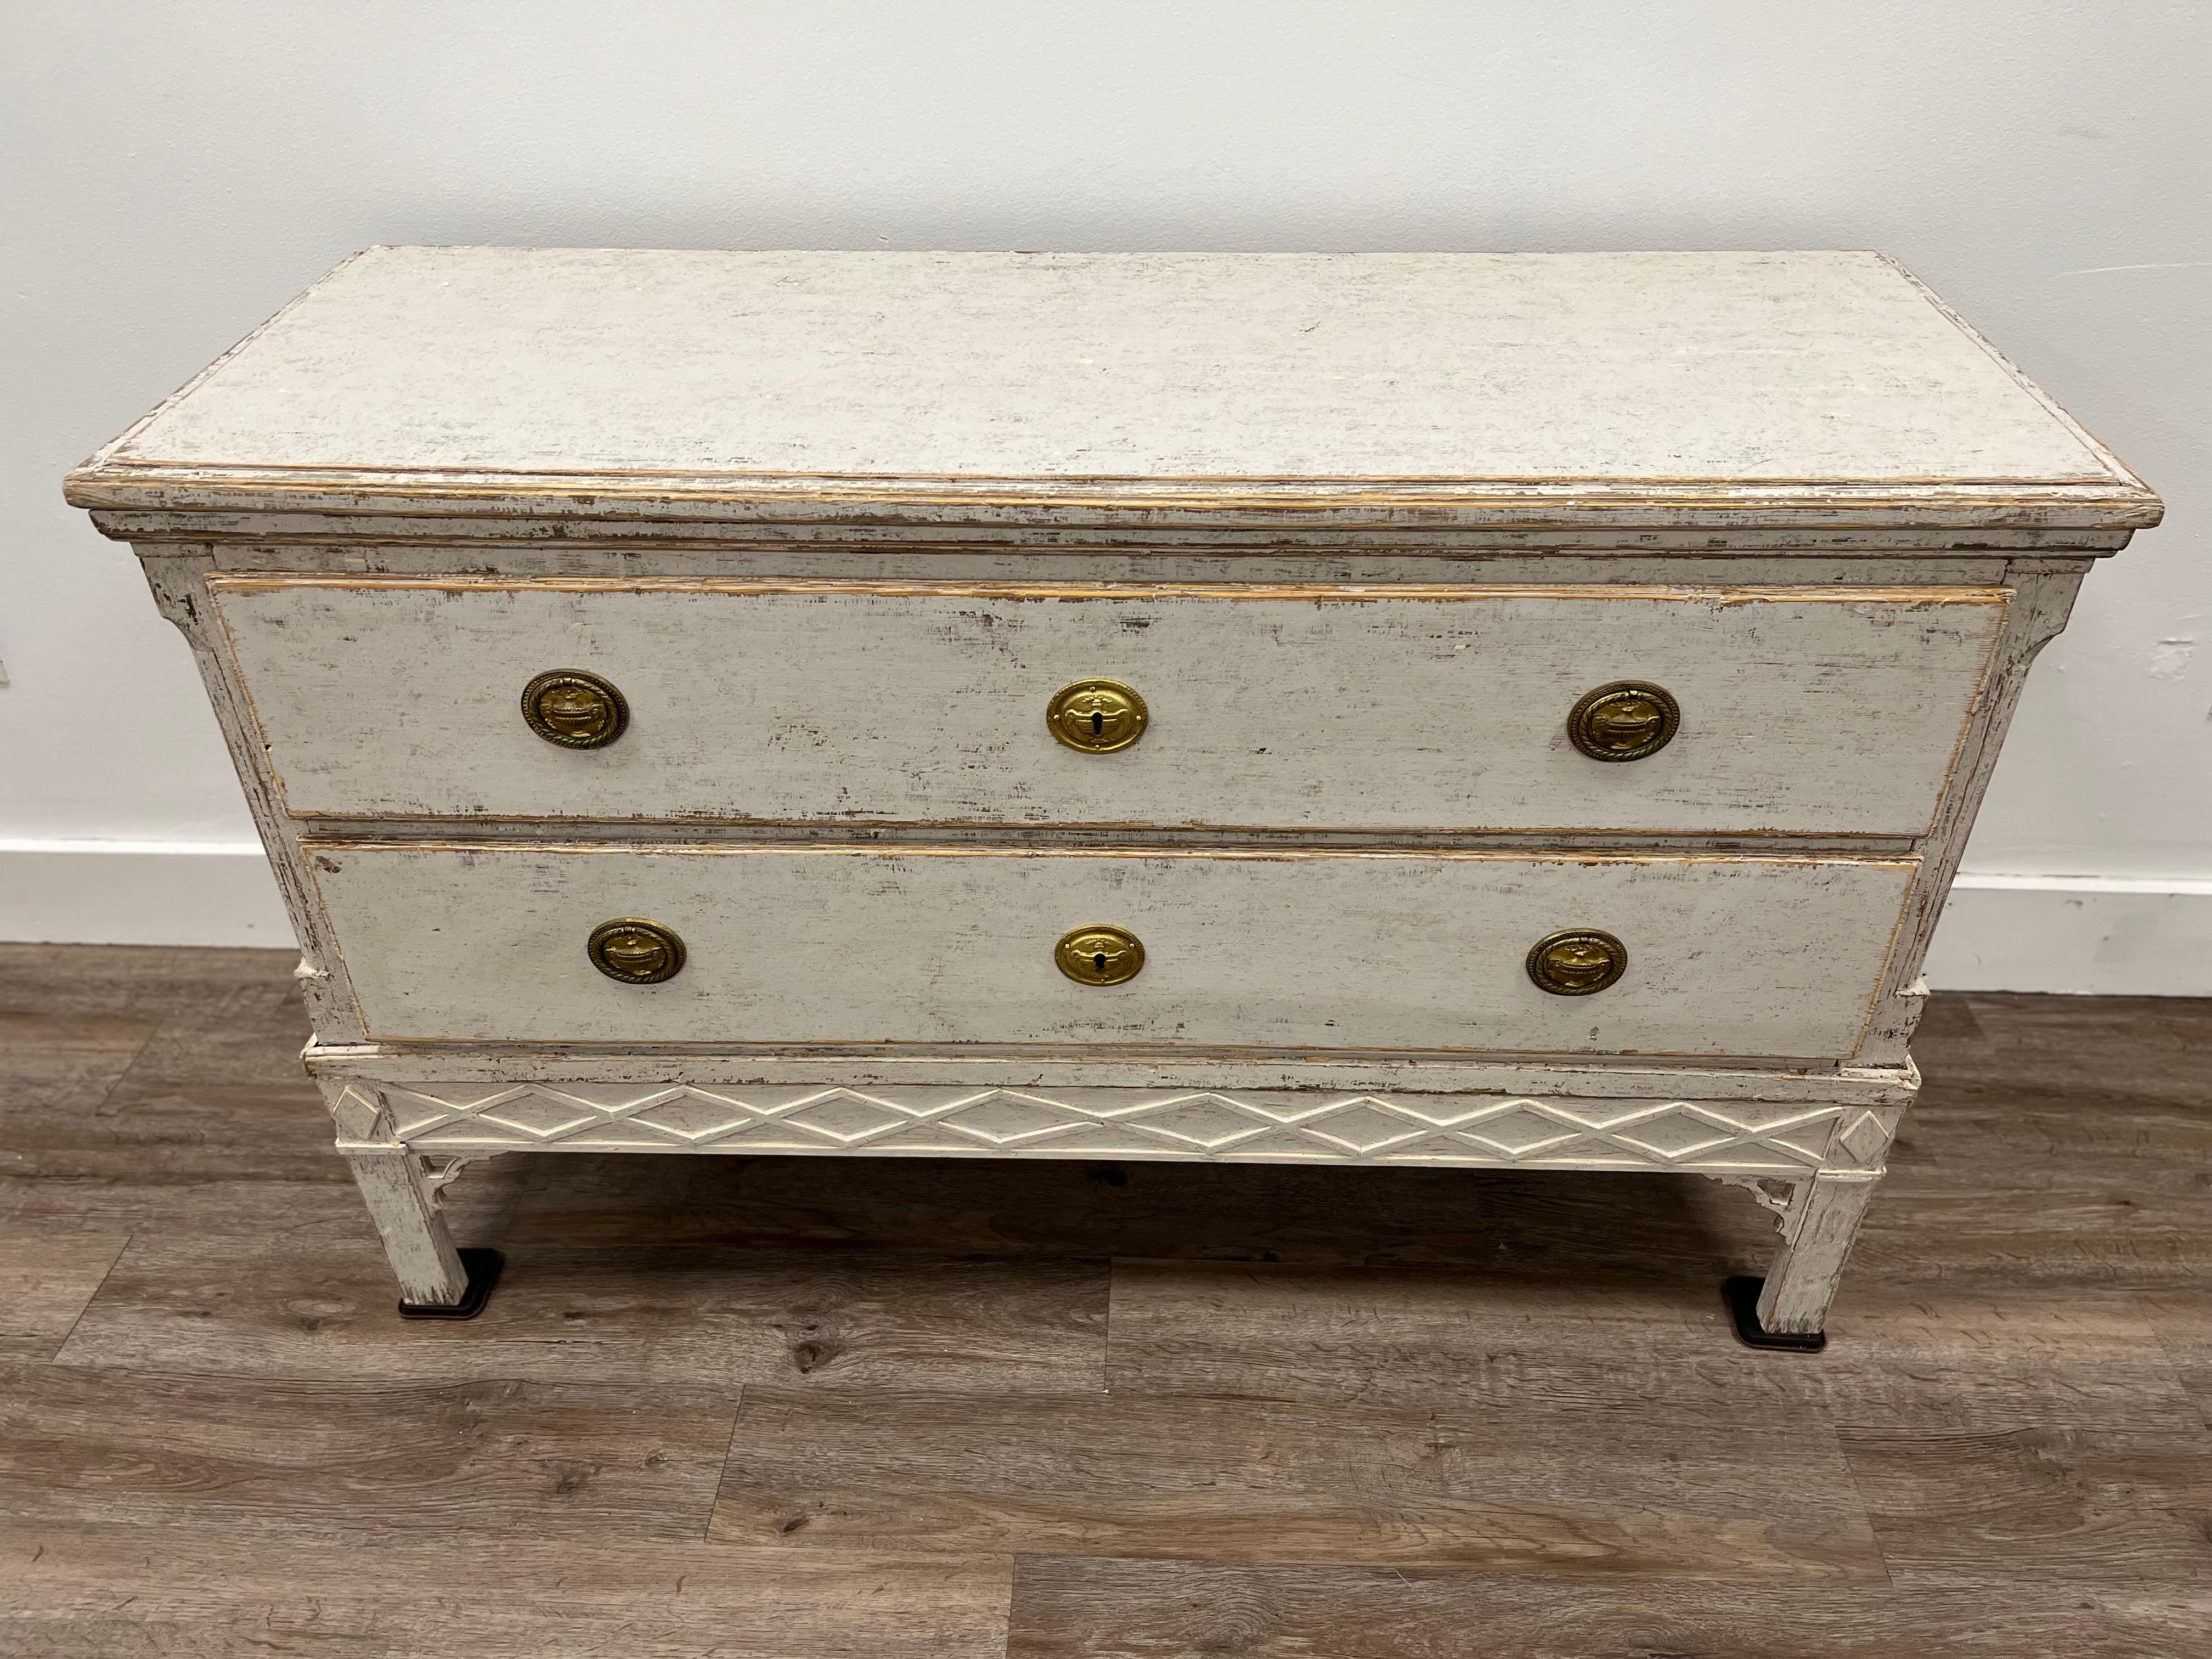 A Danish Late Gustavian commode with old (possibly original) brass hardware and locks. Notched corners with two wide drawers over a crisscross patterned apron. Square legs with small, decorative apron supports. Tastefully repainted in soft grey. 